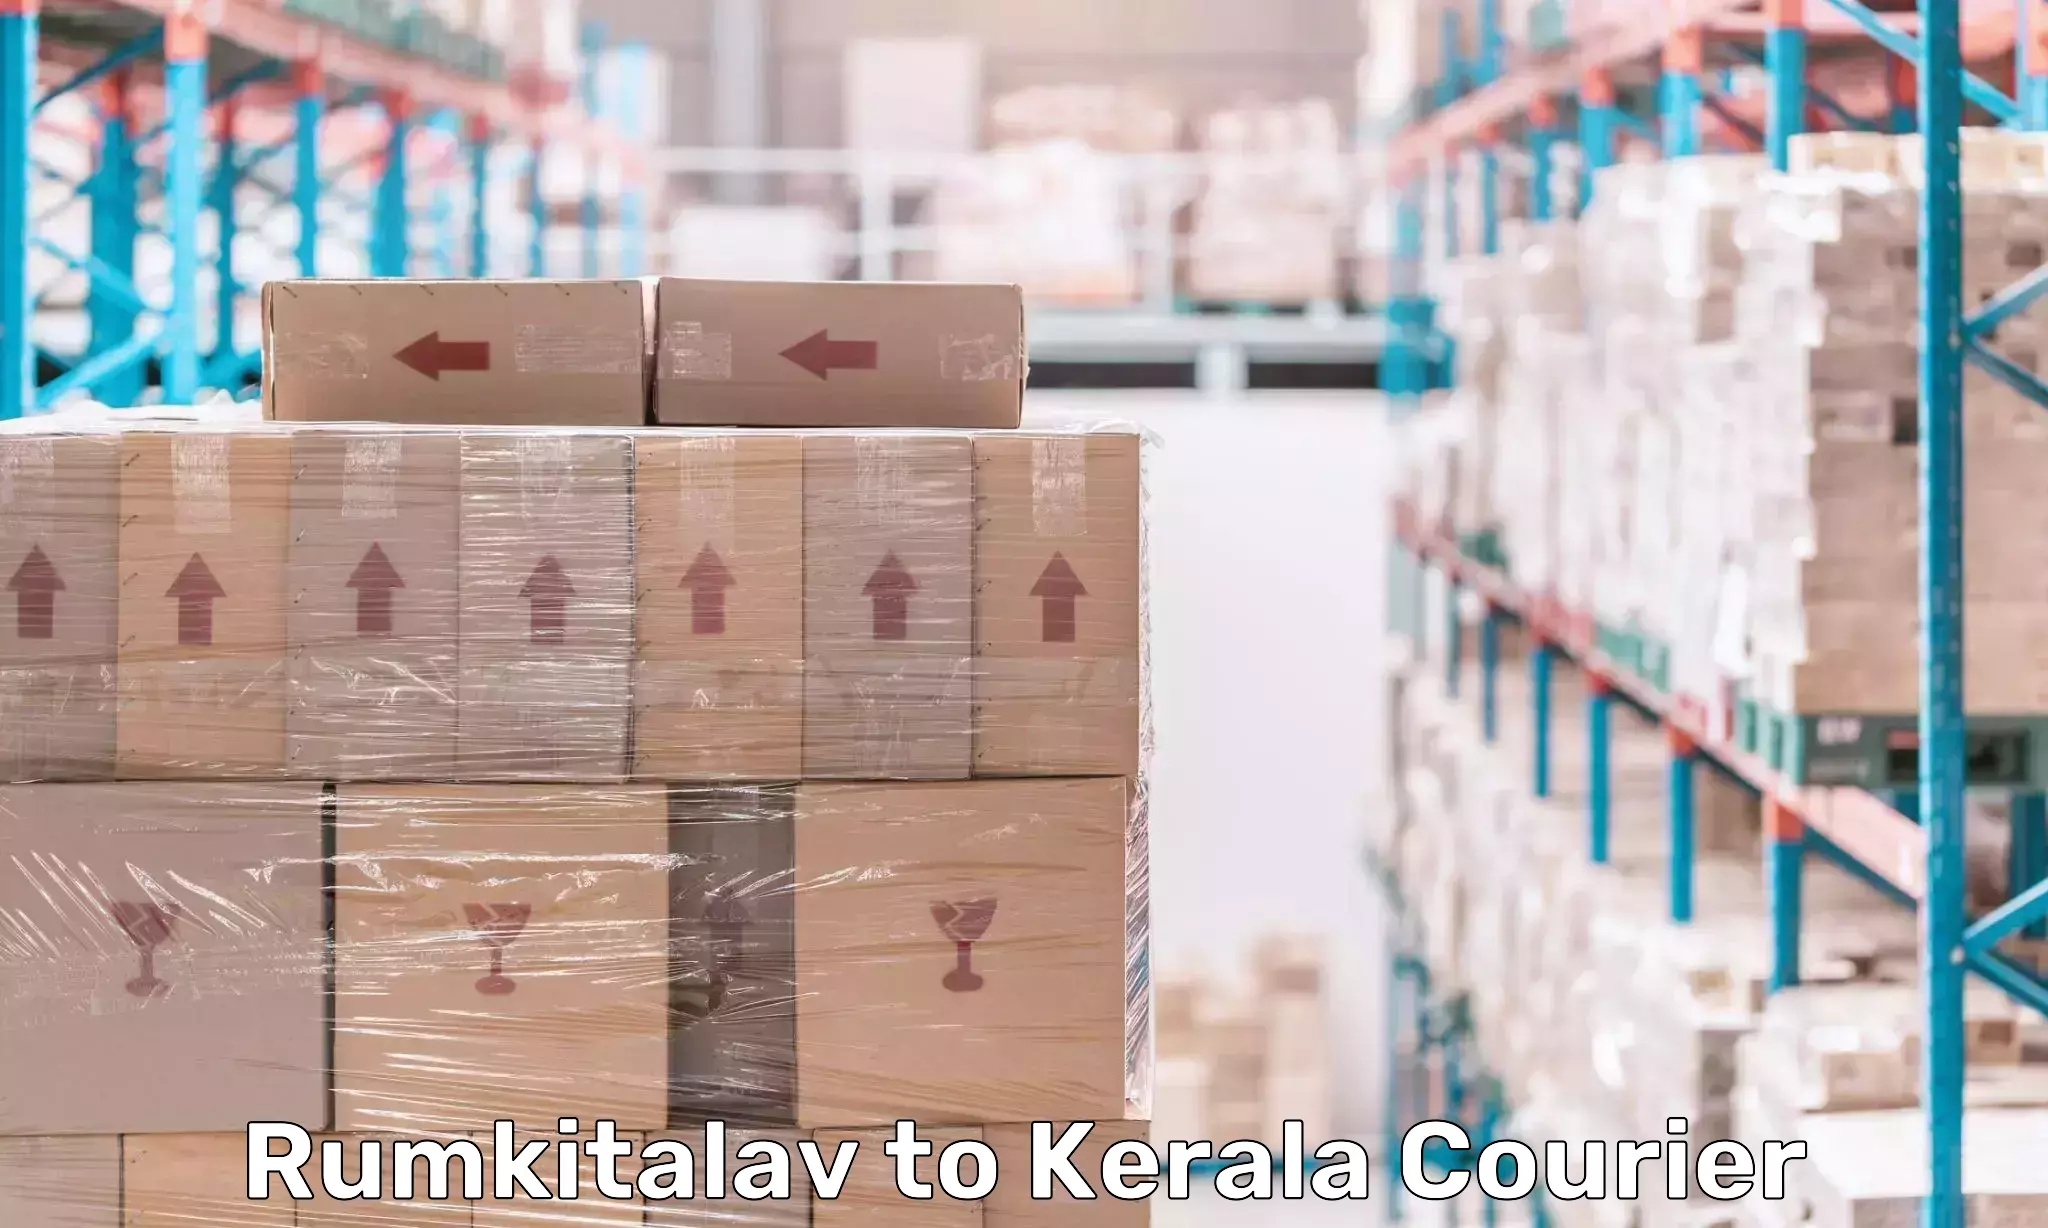 Innovative courier solutions Rumkitalav to Panthalam